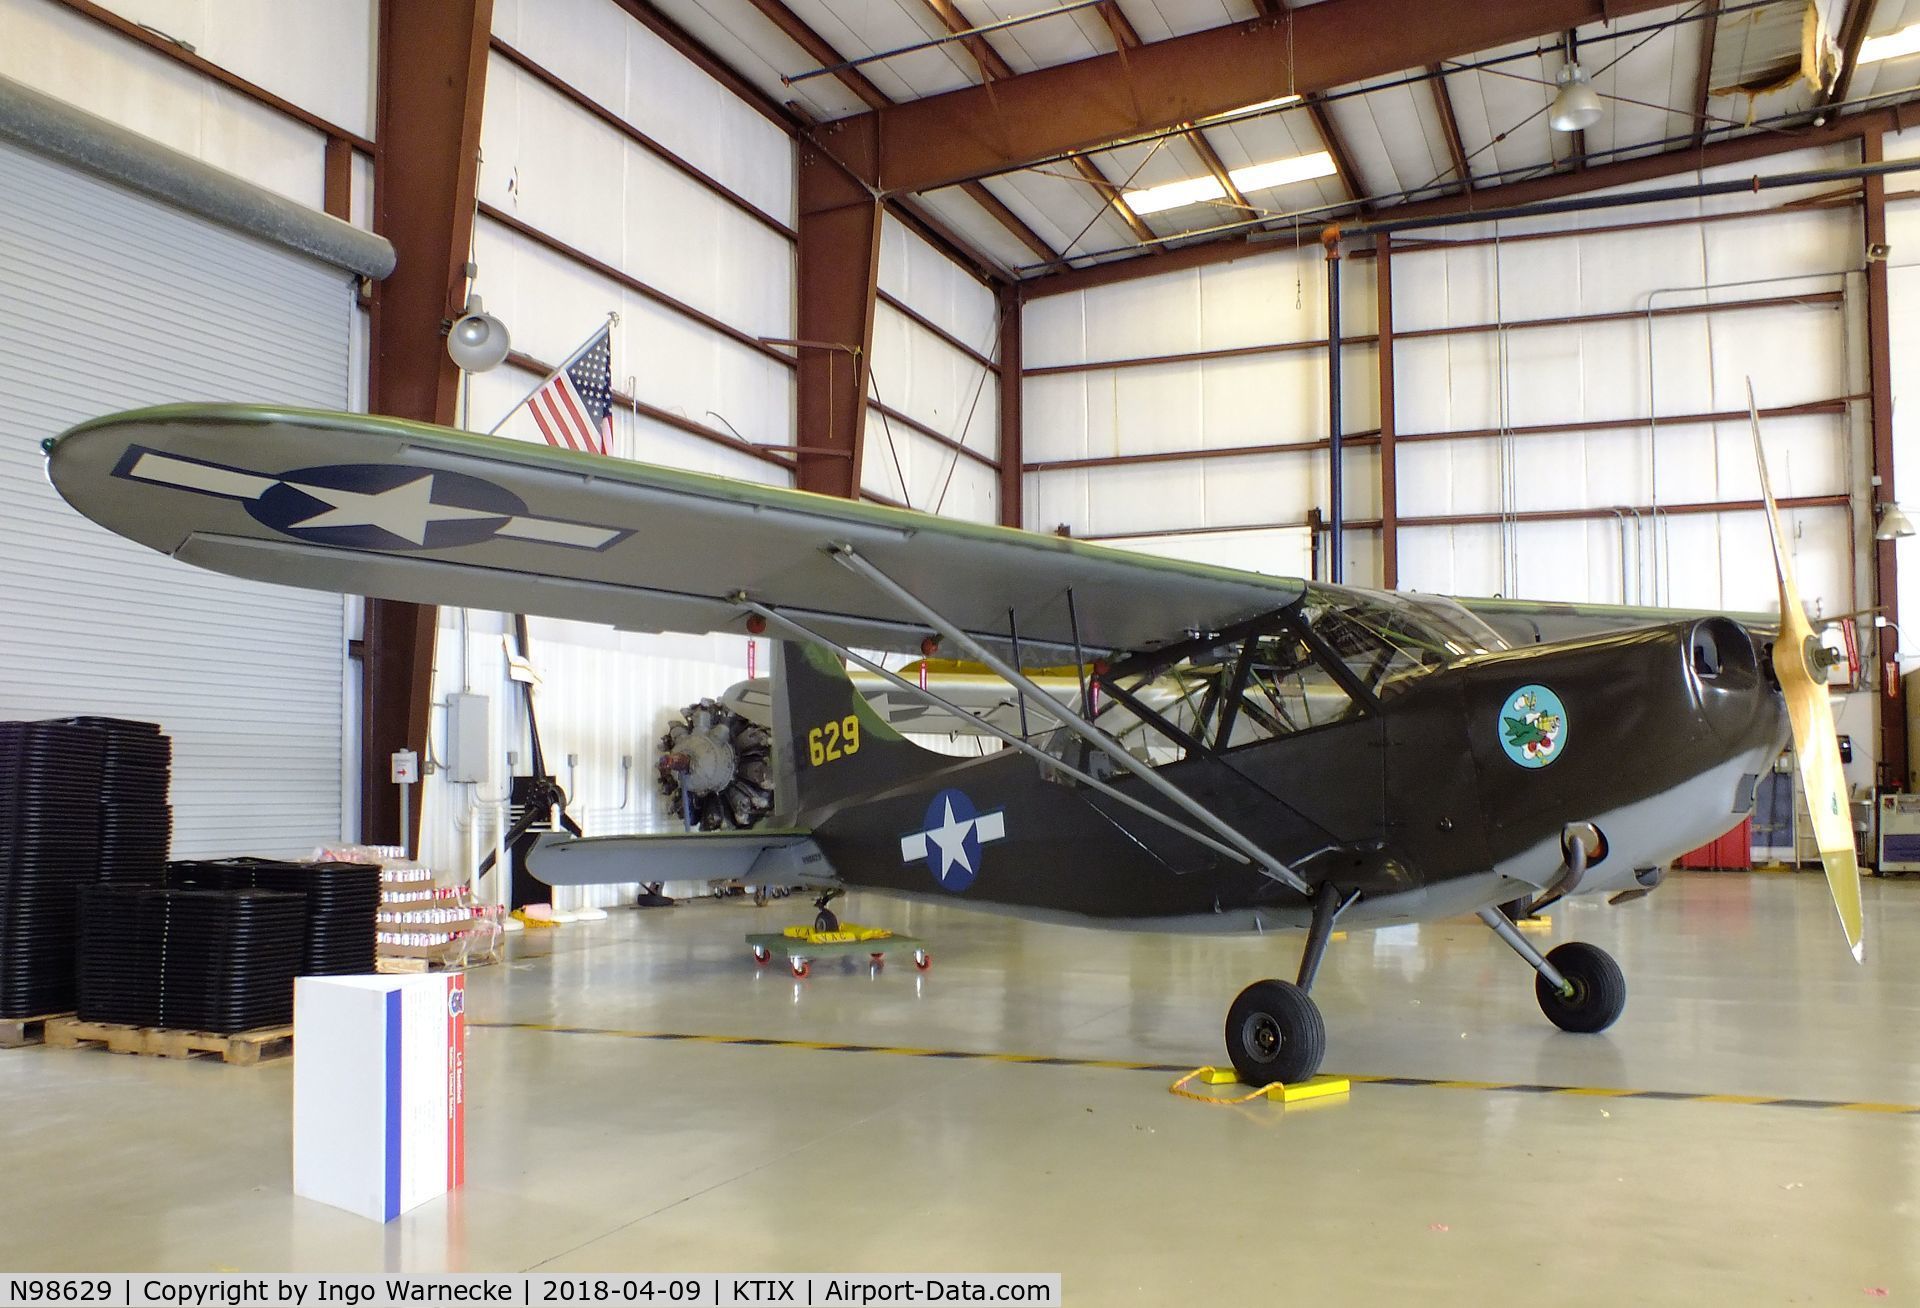 N98629, 1943 Stinson L-5 Sentinel C/N 78-870, Stinson L-5 Sentinel at Space Coast Regional Airport, Titusville (the day after Space Coast Warbird AirShow 2018)